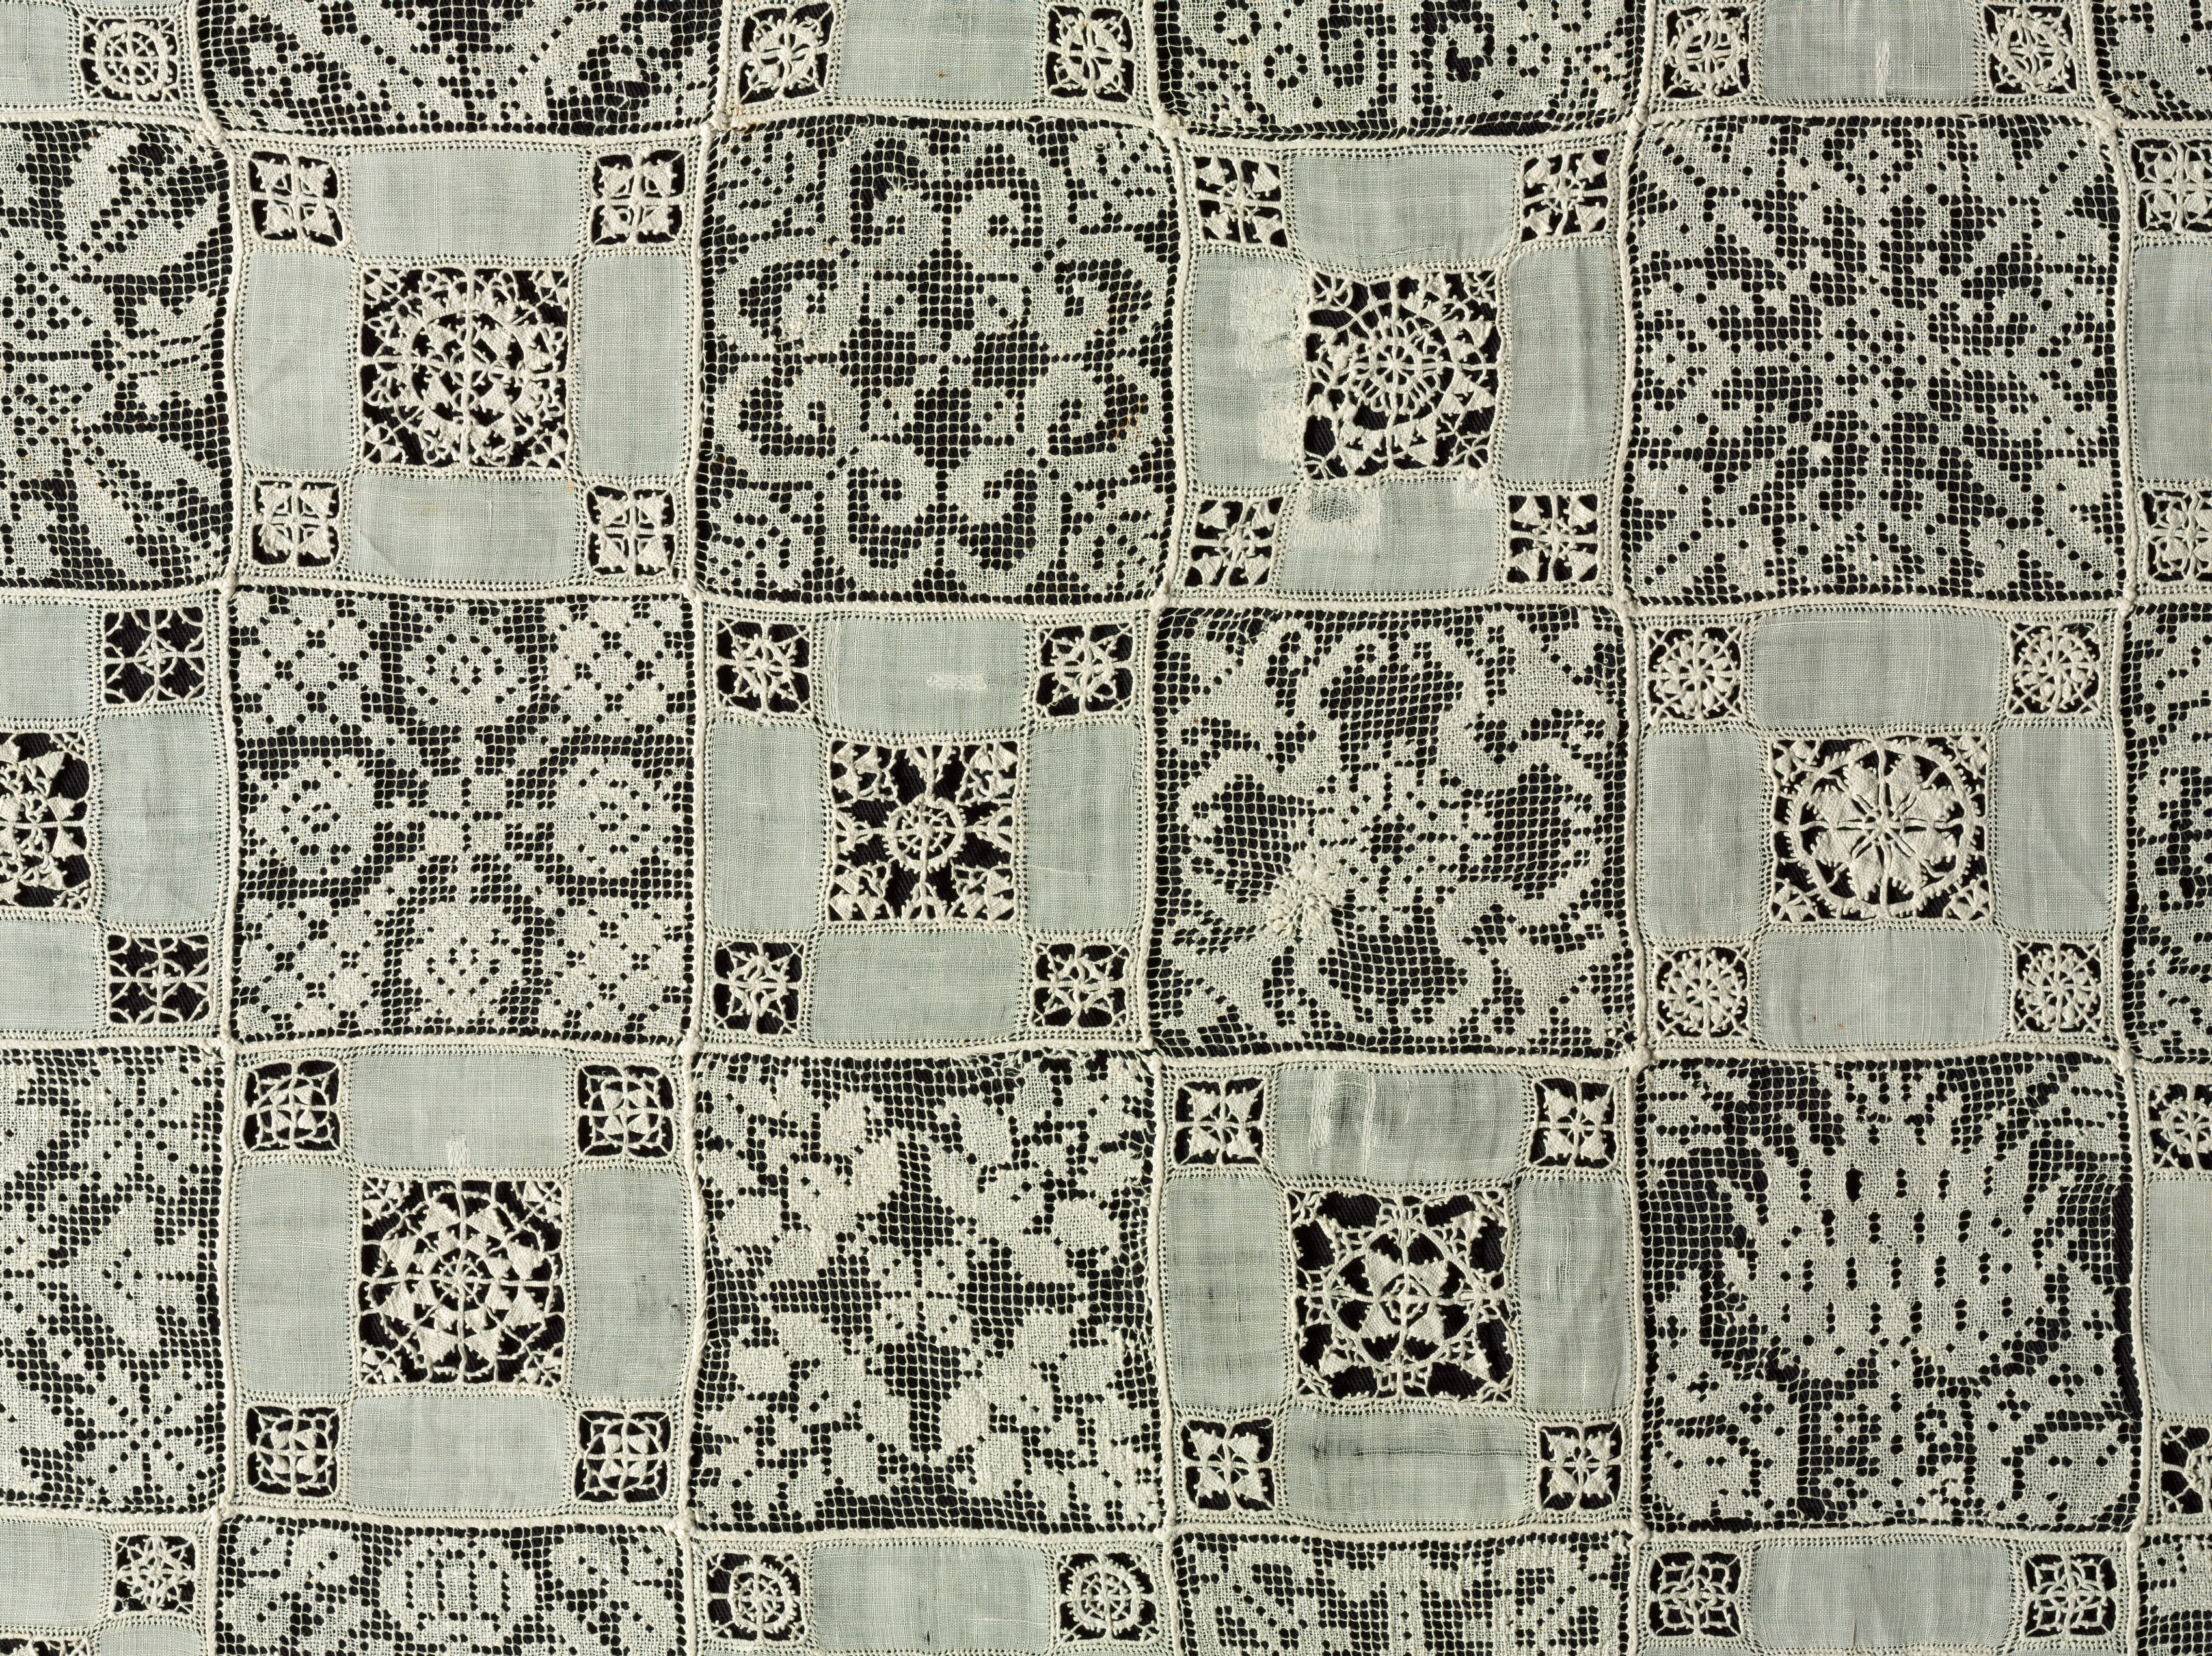 Cloth with Floral and Vegetal Patterns Italy, 16th century